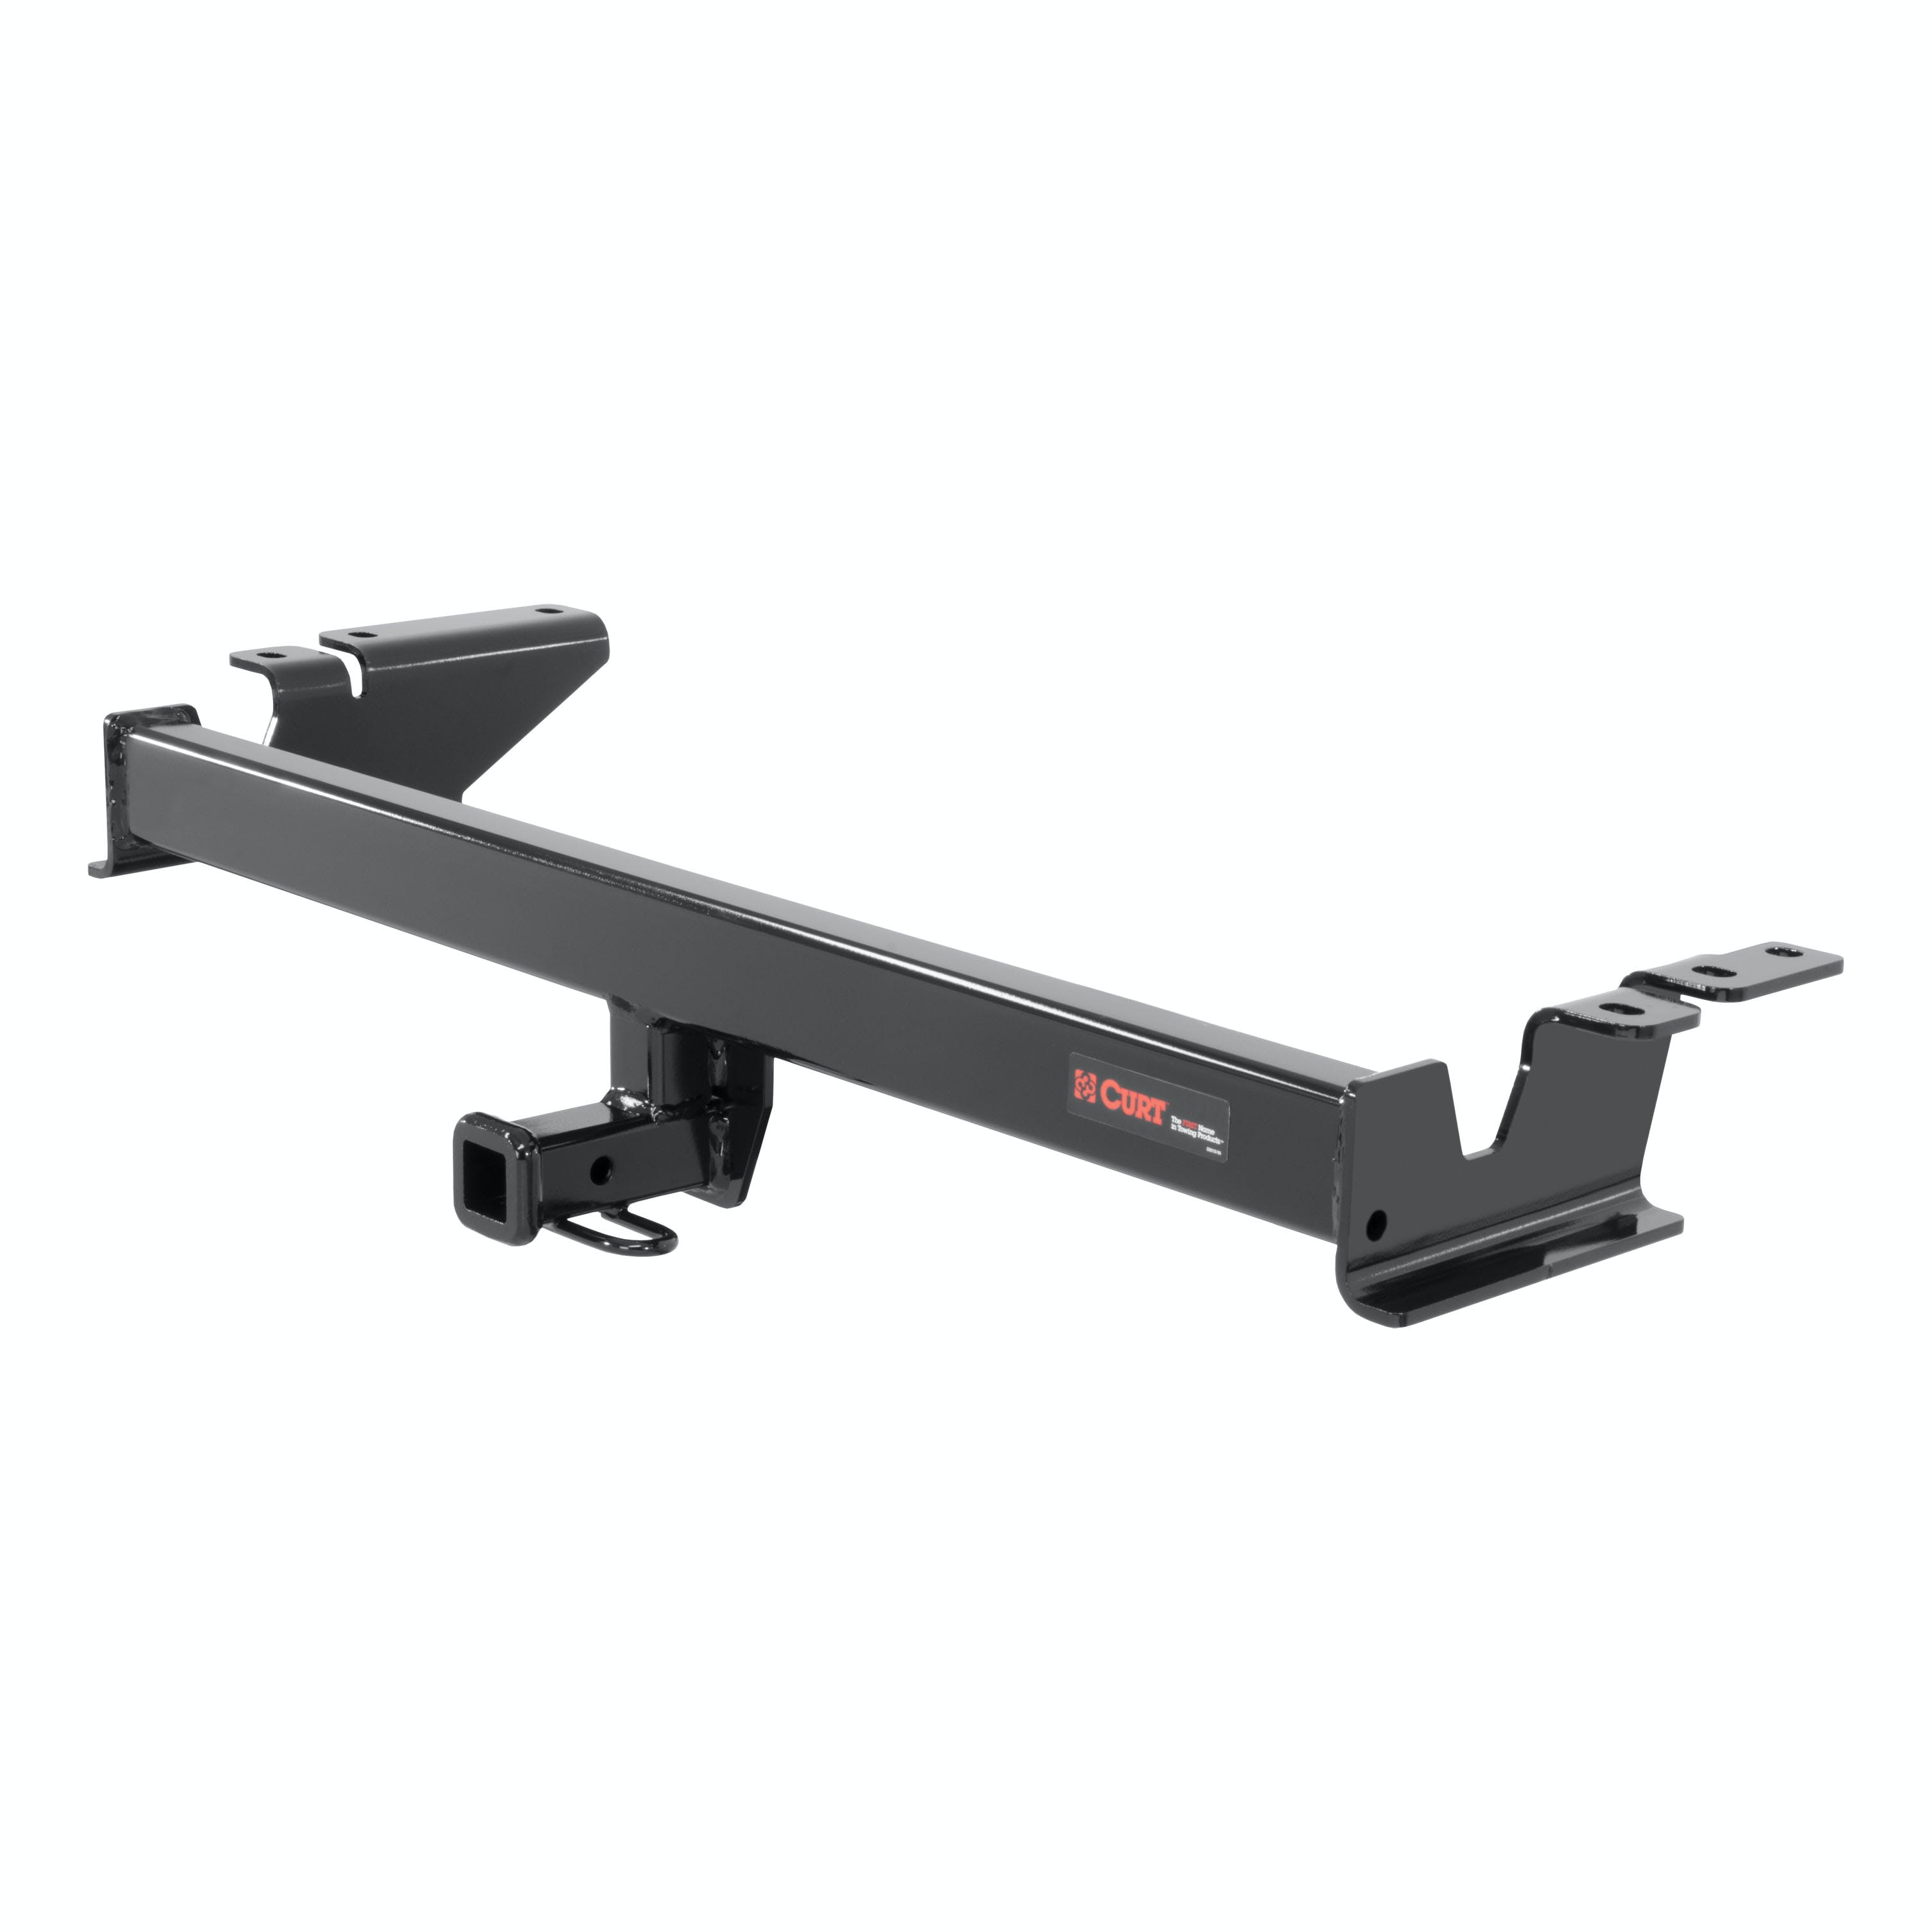 CURT 11433 Class 1 Trailer Hitch, 1-1/4 Receiver, Select Chevrolet Spark